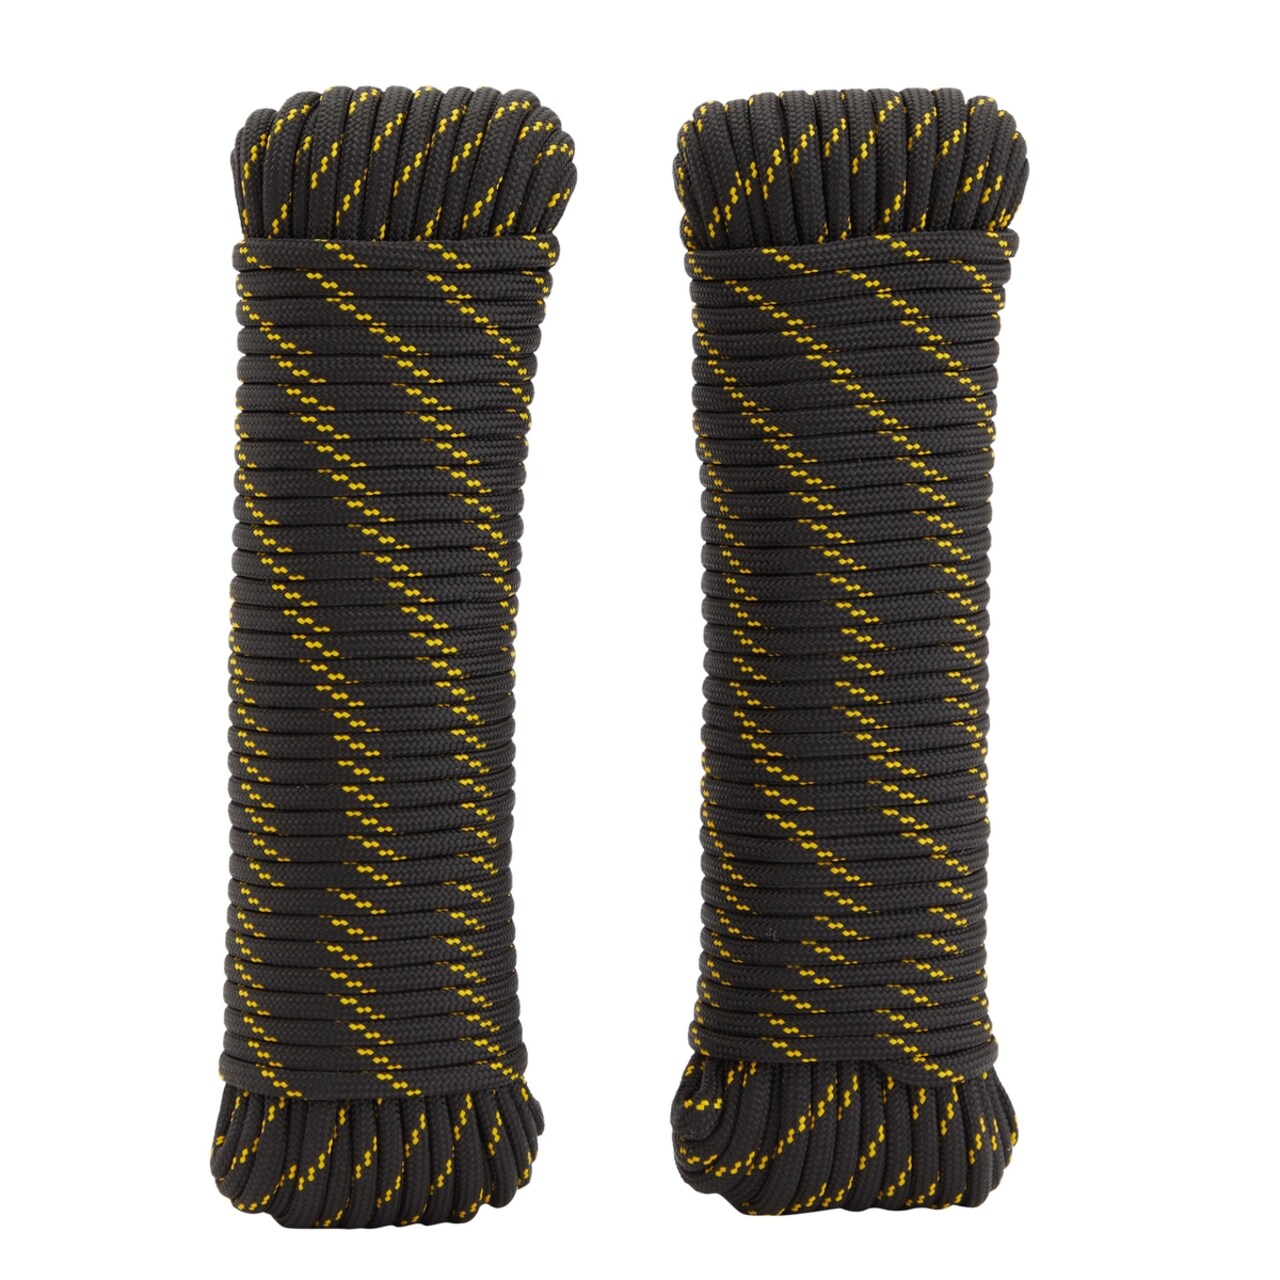 2 Pack 1/4 Inch x 100 Ft Braided Nylon Rope for Knot Tying Practice,  Camping, Boats, Trailer Tie Down, Pinata